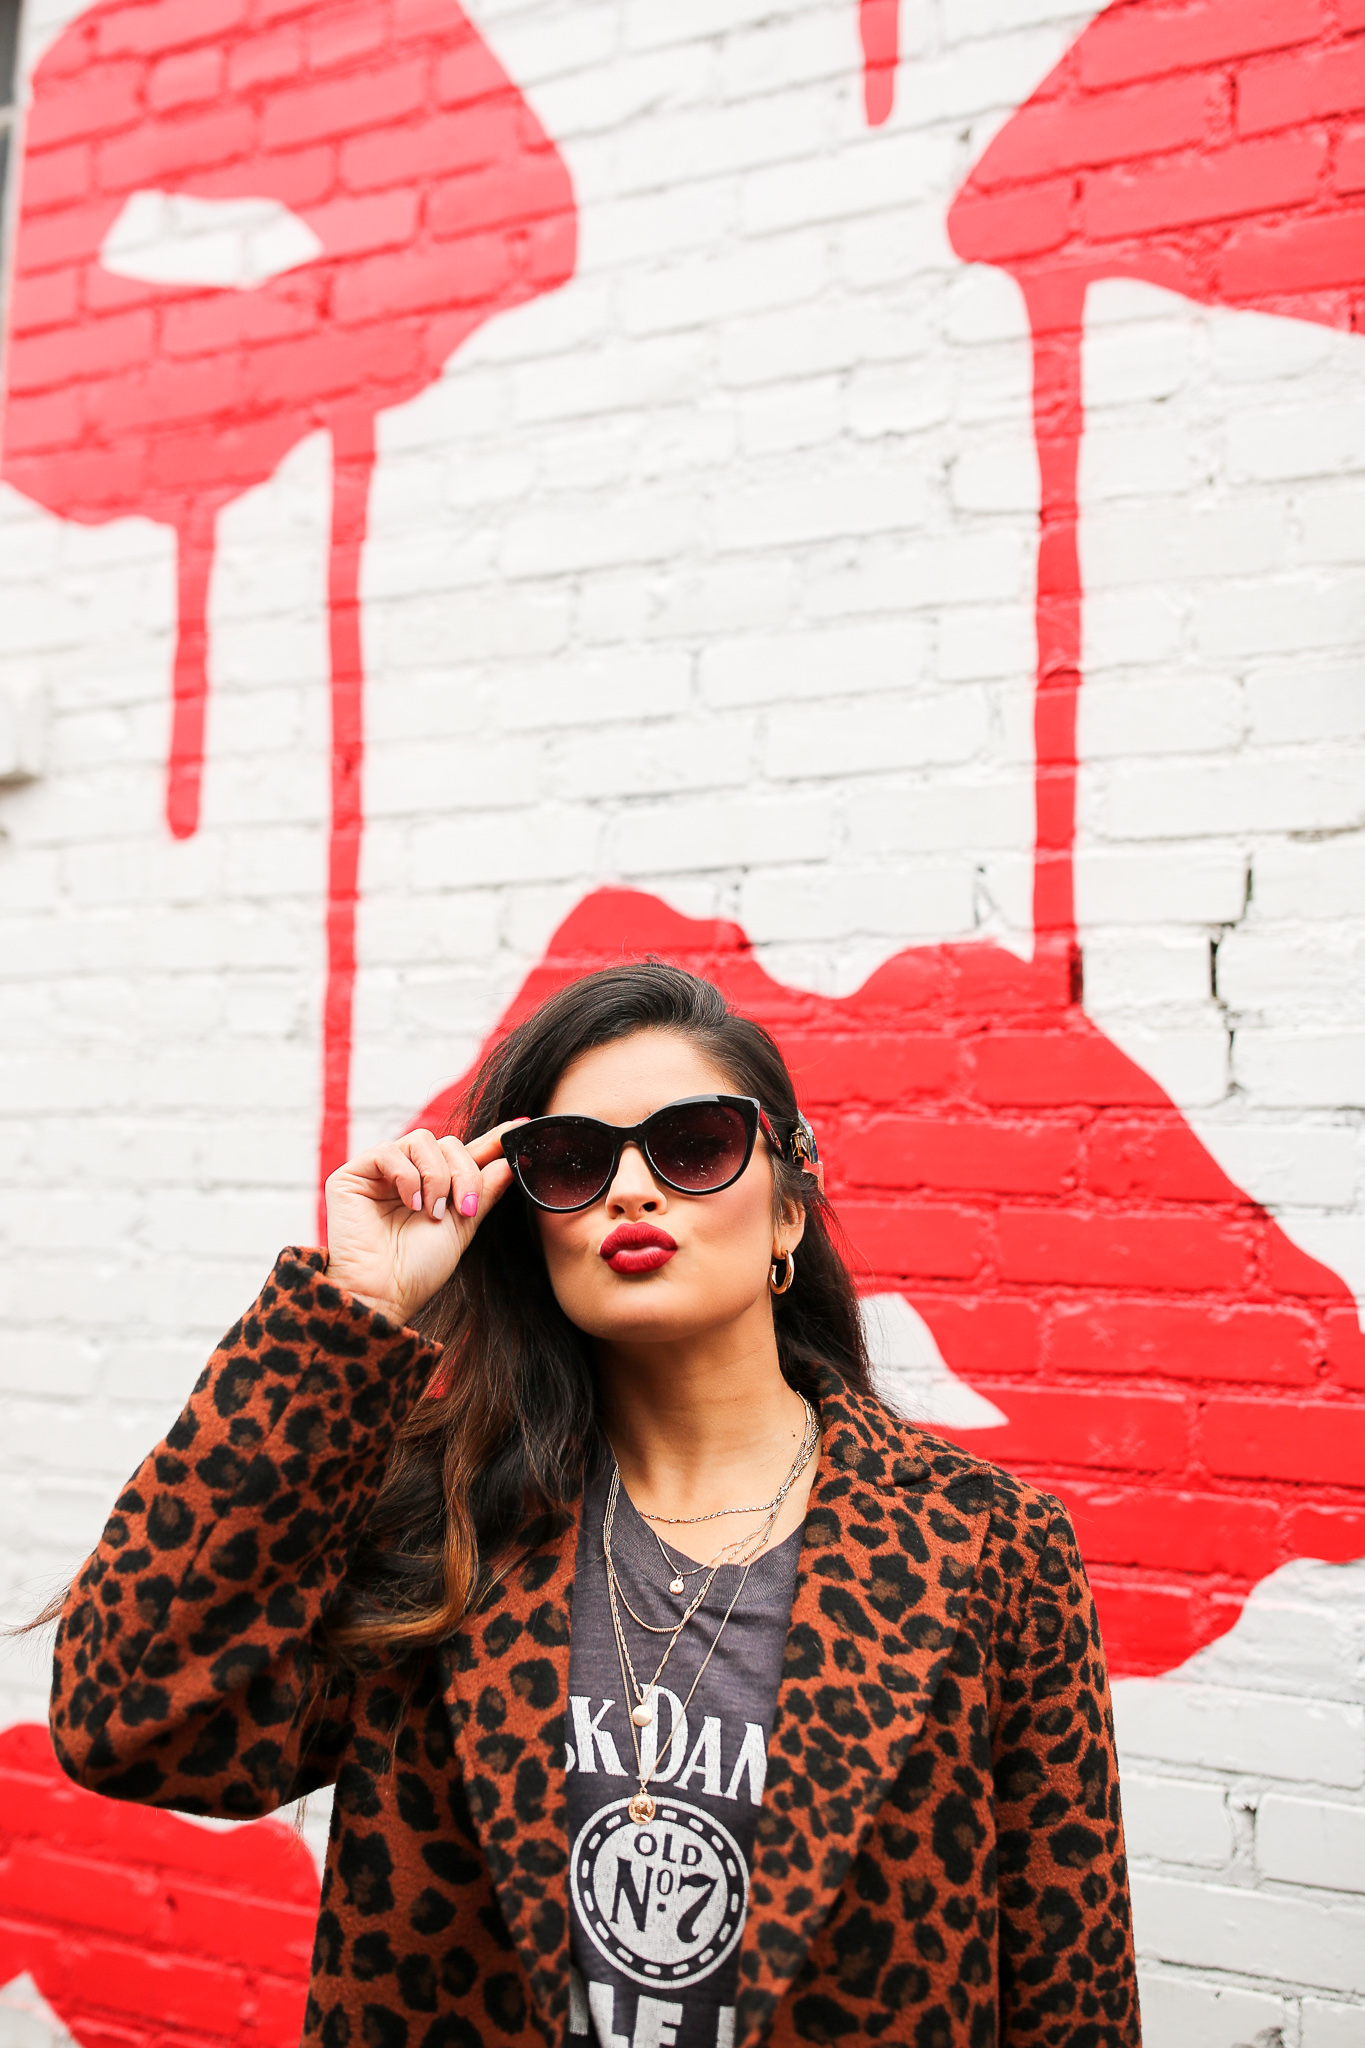 Priya the Blog, Nashville style blog, Nashville styler blogger, Nashville fashion blog, Nashville fashion blogger, how to wear a leopard coat, vintage graphic t-shirt, how to style a vintage graphic t-shirt, Stan Smith trainers, winter outfit, Stila Stay All Day Liquid Lipstick in Beso, Winter outfit with leopard print coat, Spanx faux leather leggings